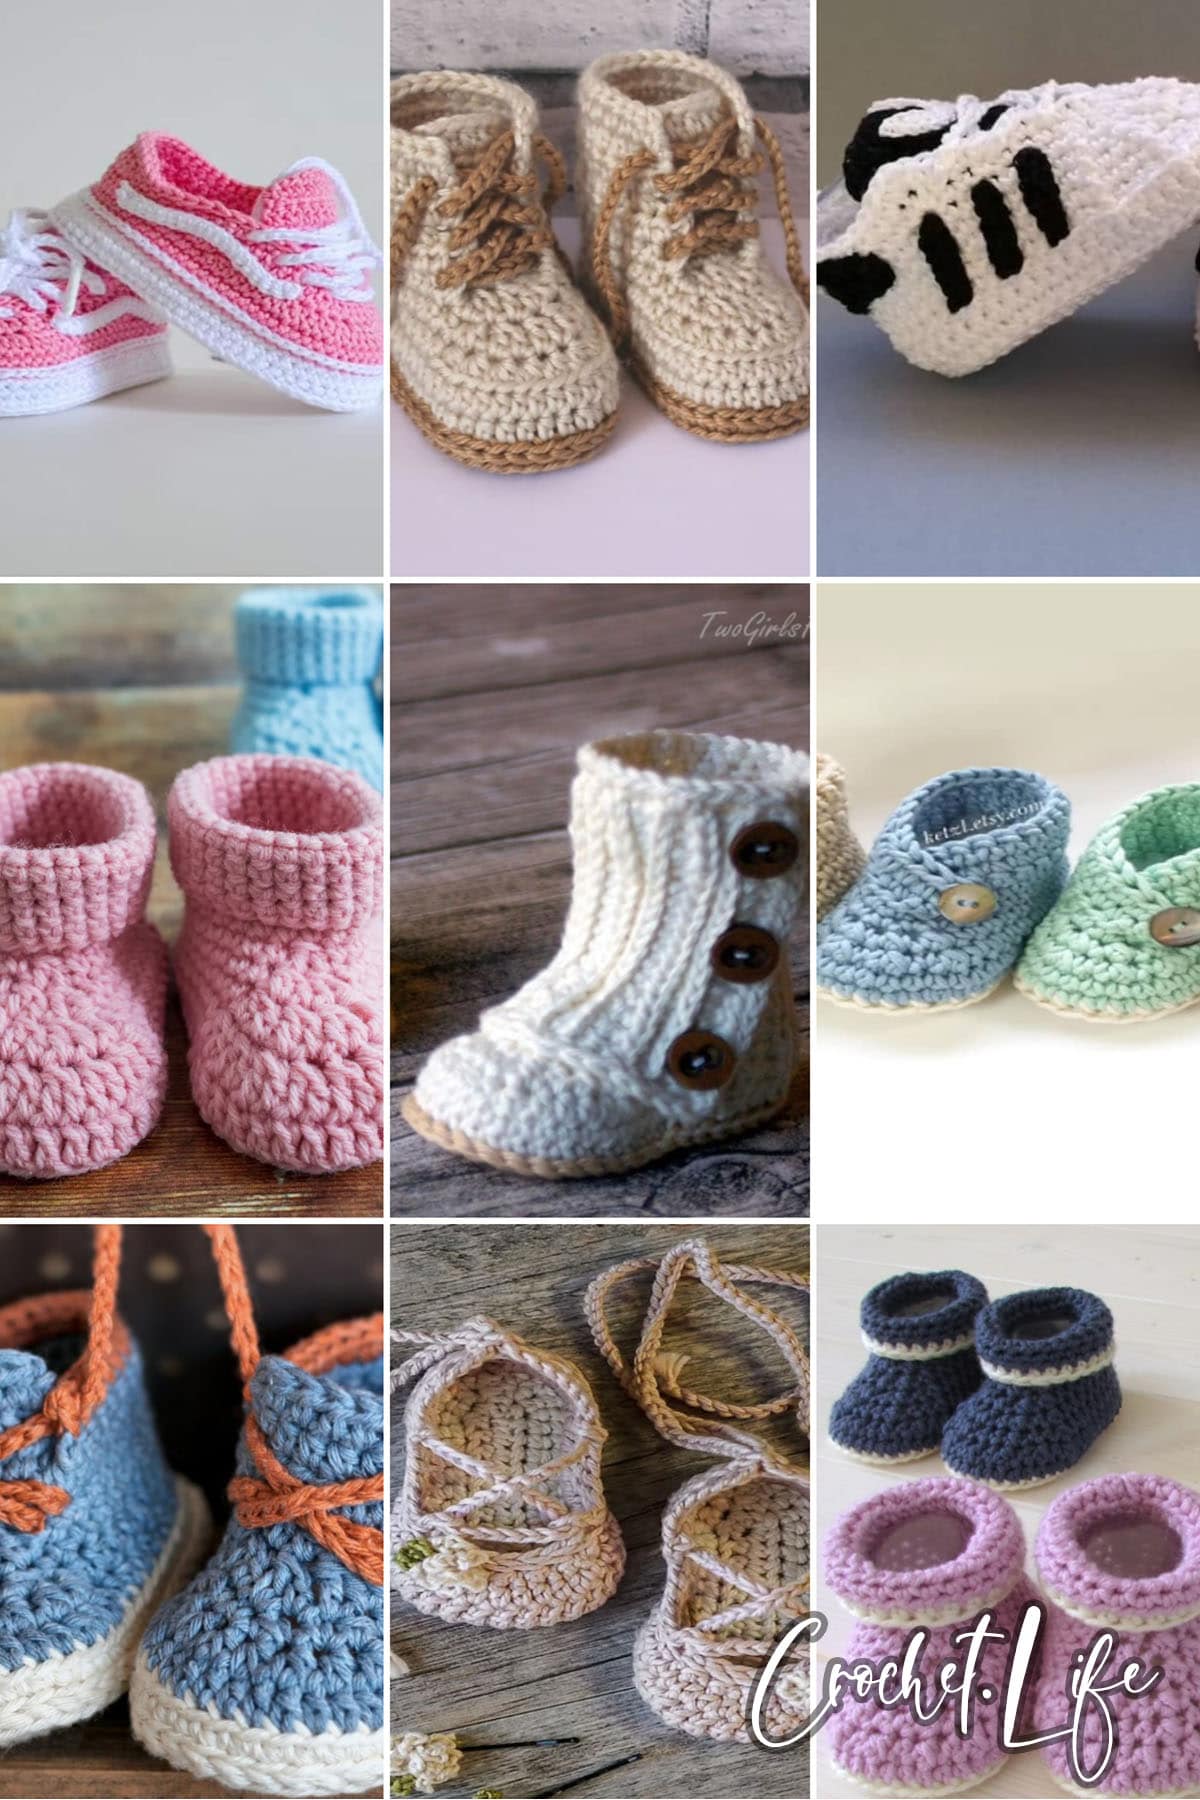 HANDMADE CROCHET BABY FIRST SHOES WOOL CASUAL BOOTS TRAINERS SLIPPERS 